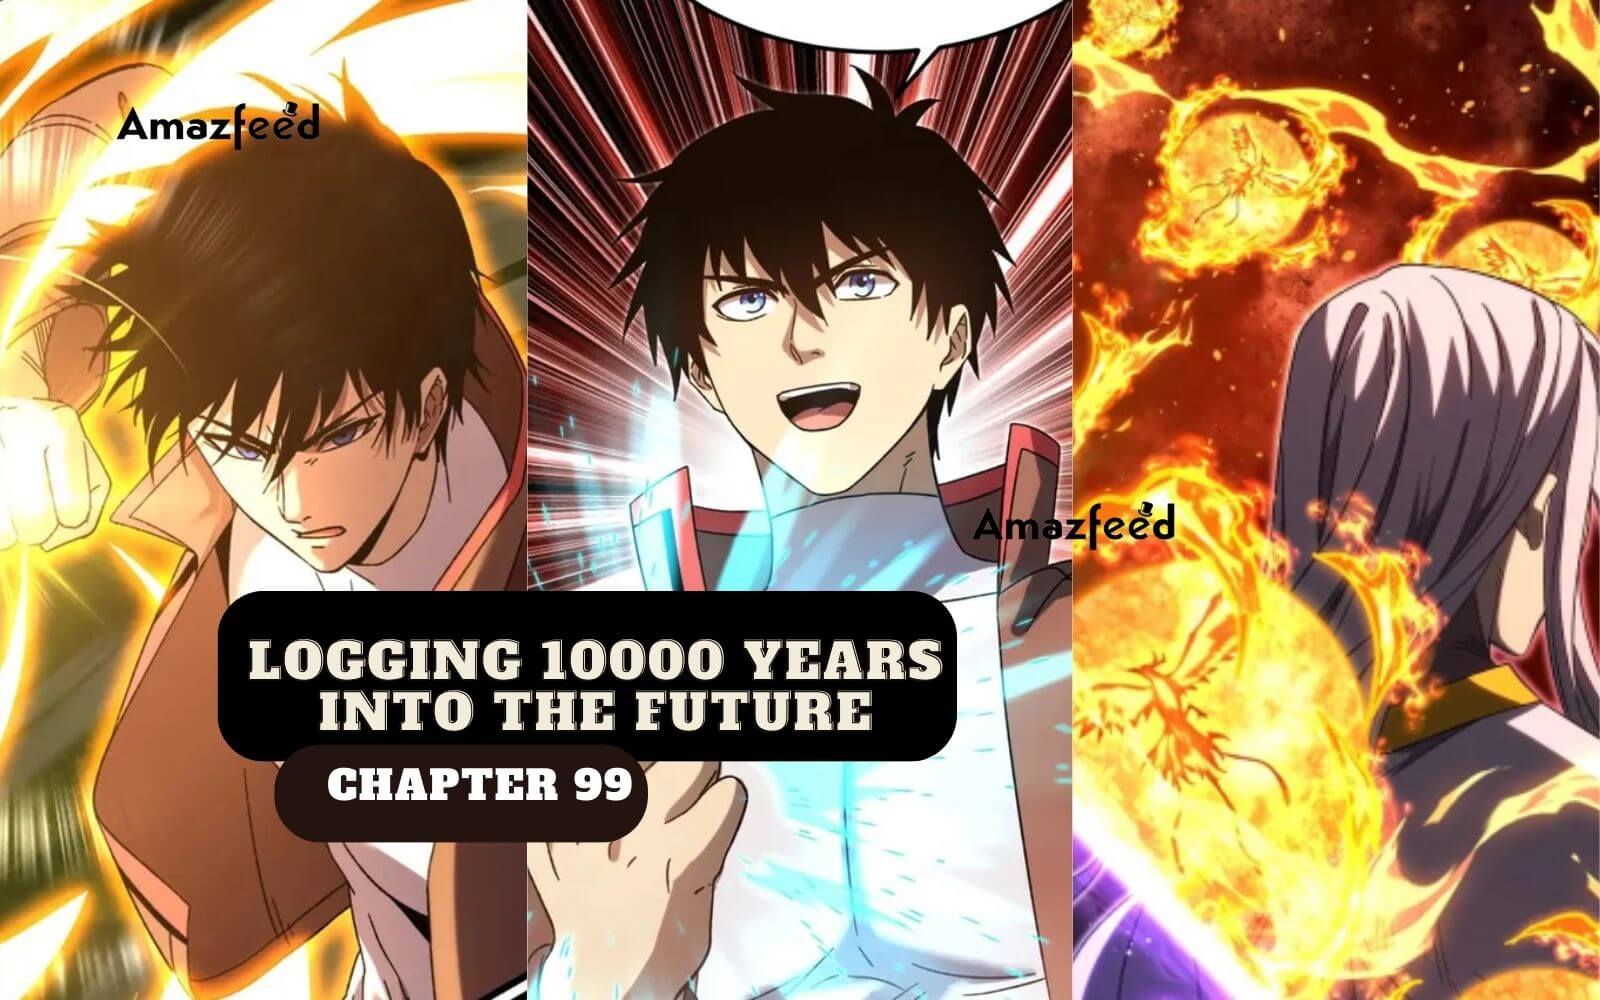 Logging 10000 Years into the Future, Chapter 99